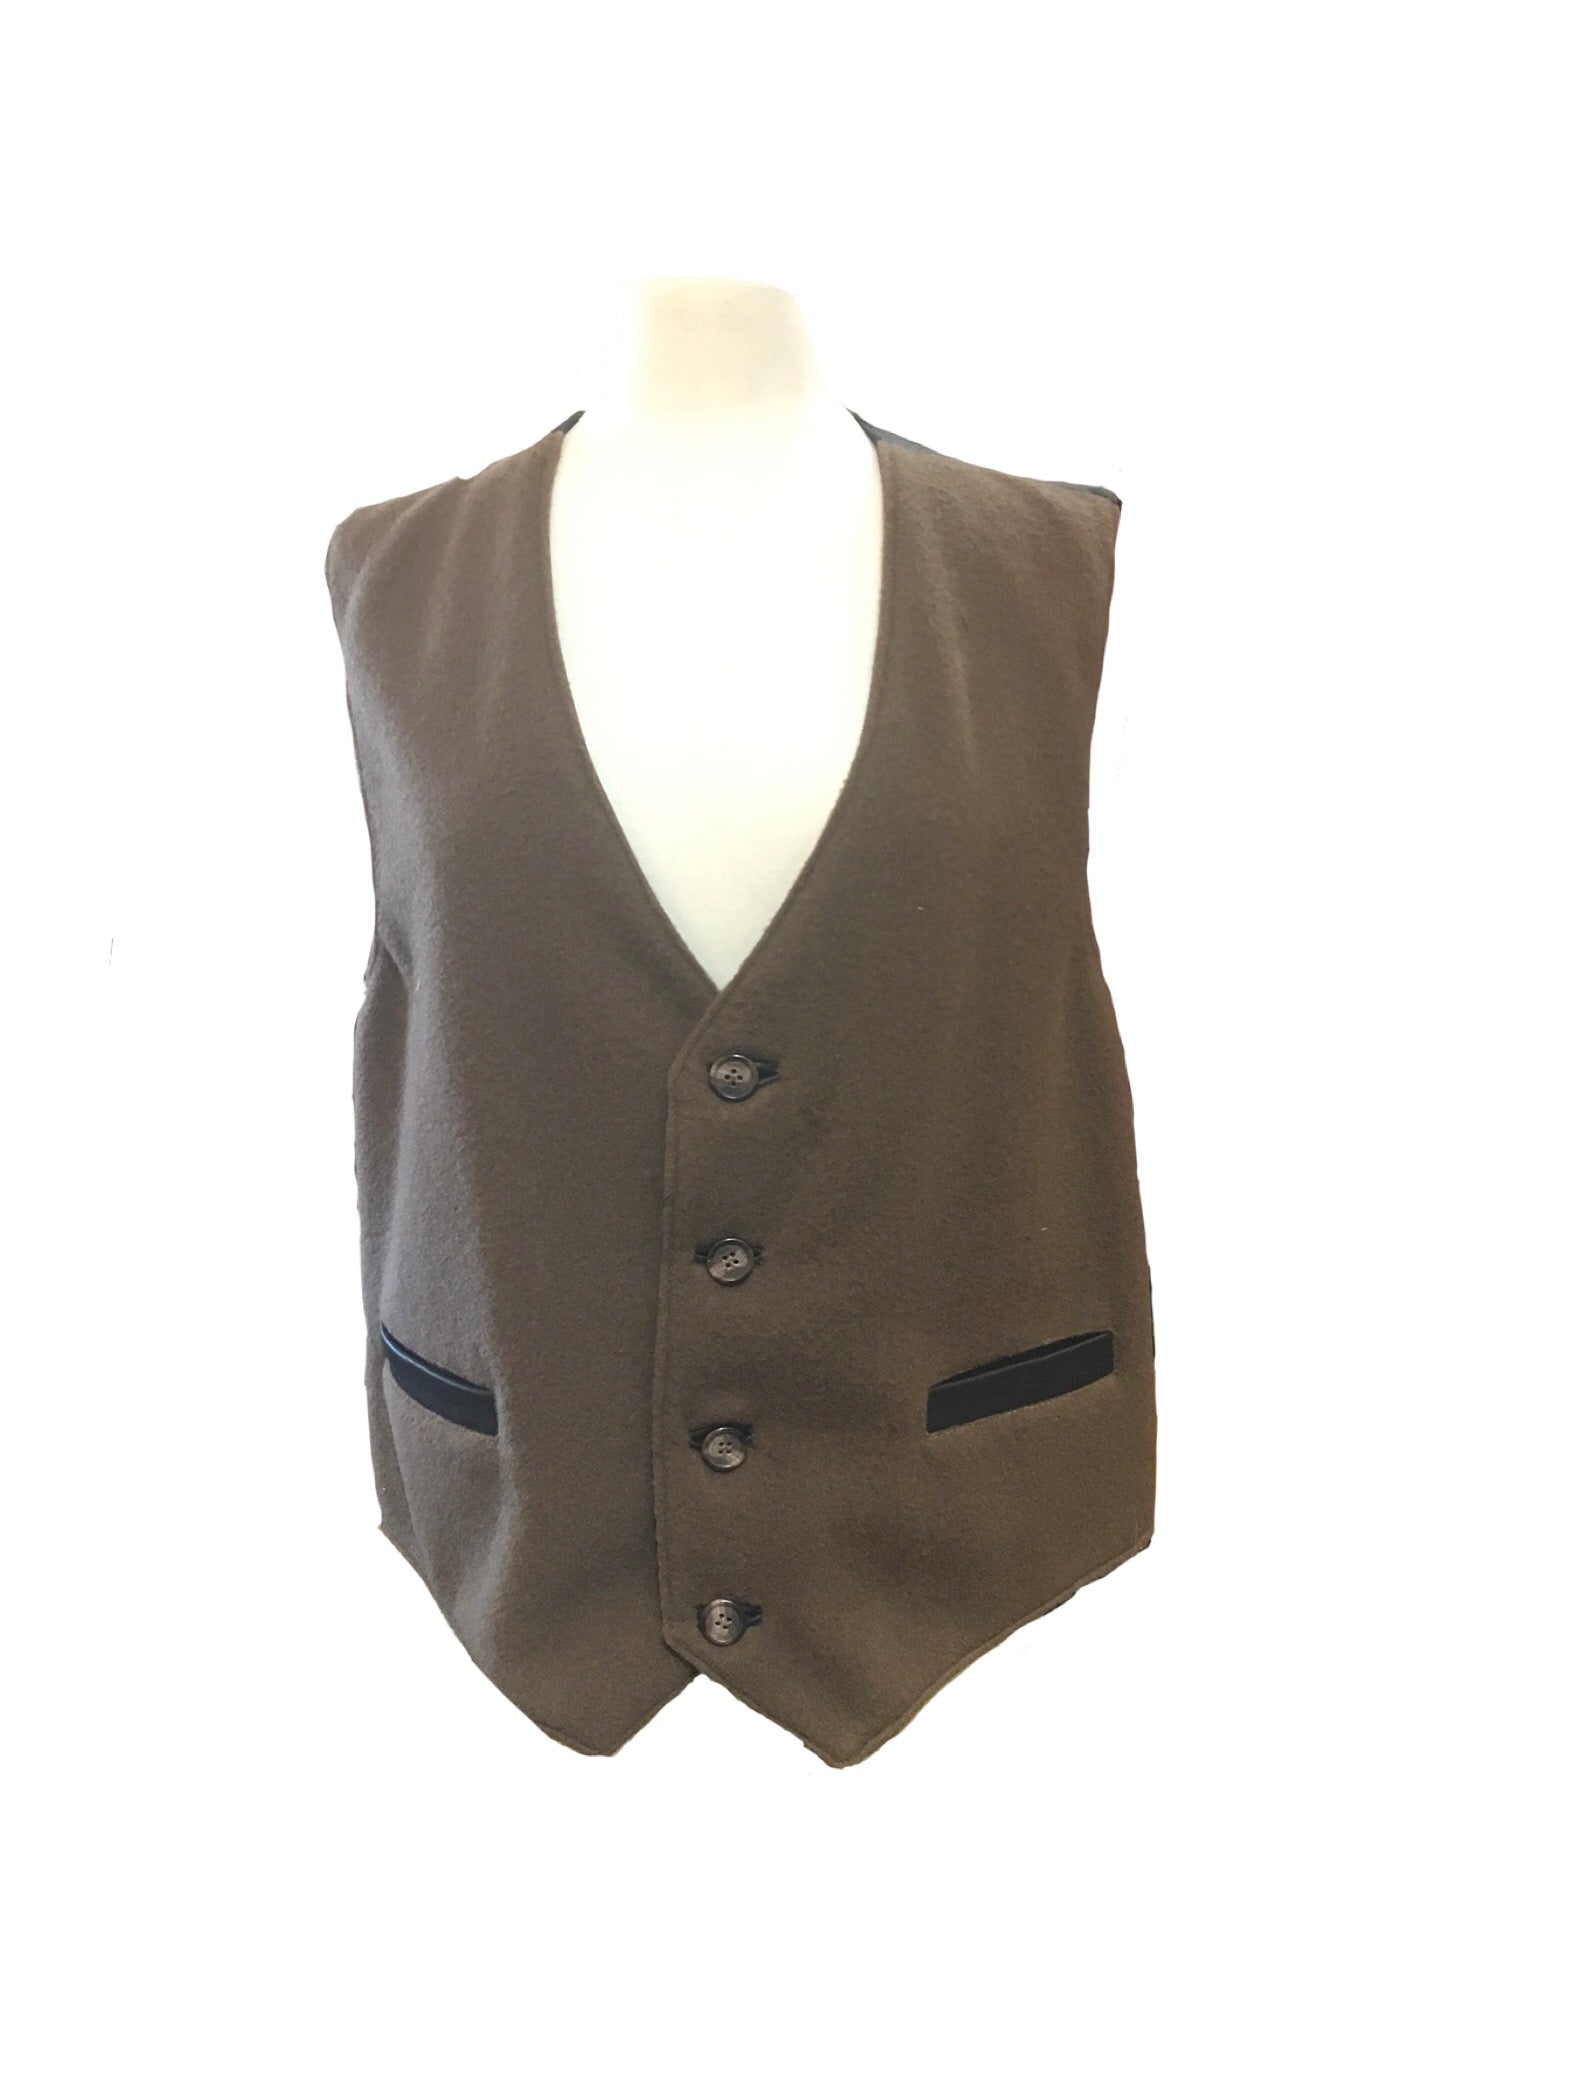 Bison Fabric and Leather Vests